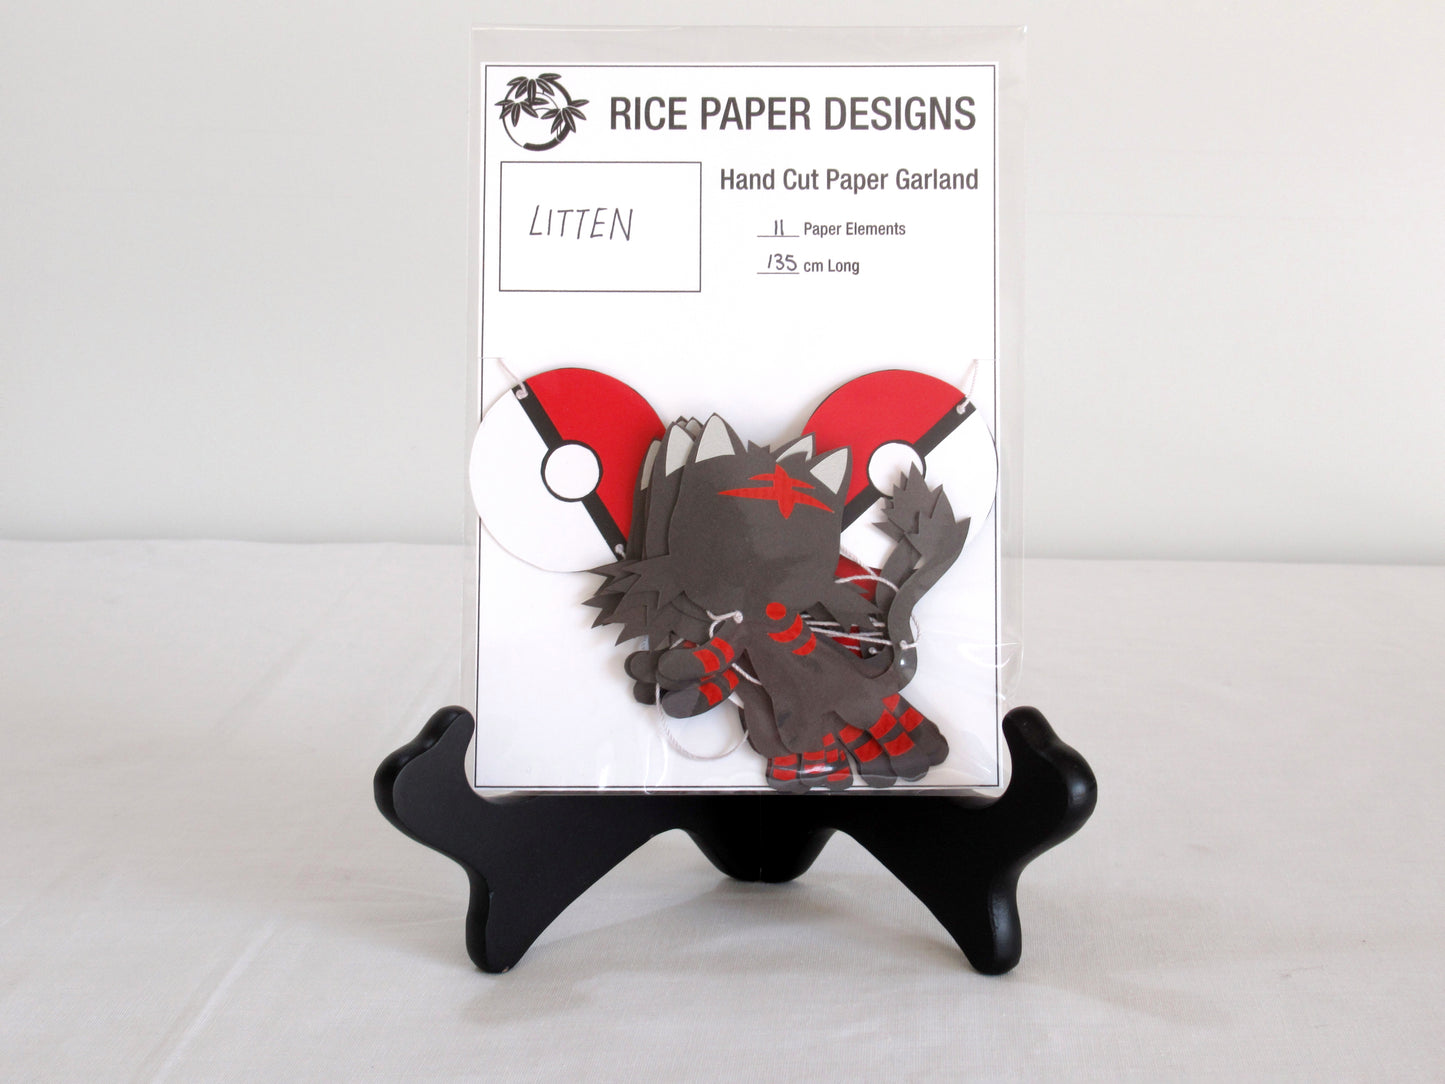 A garland with a series of paper littens and pokeballs arranged in neat bundle inside a clear bag. There is a paper behind them showing the Rice Paper Designs logo, and information about the garland.